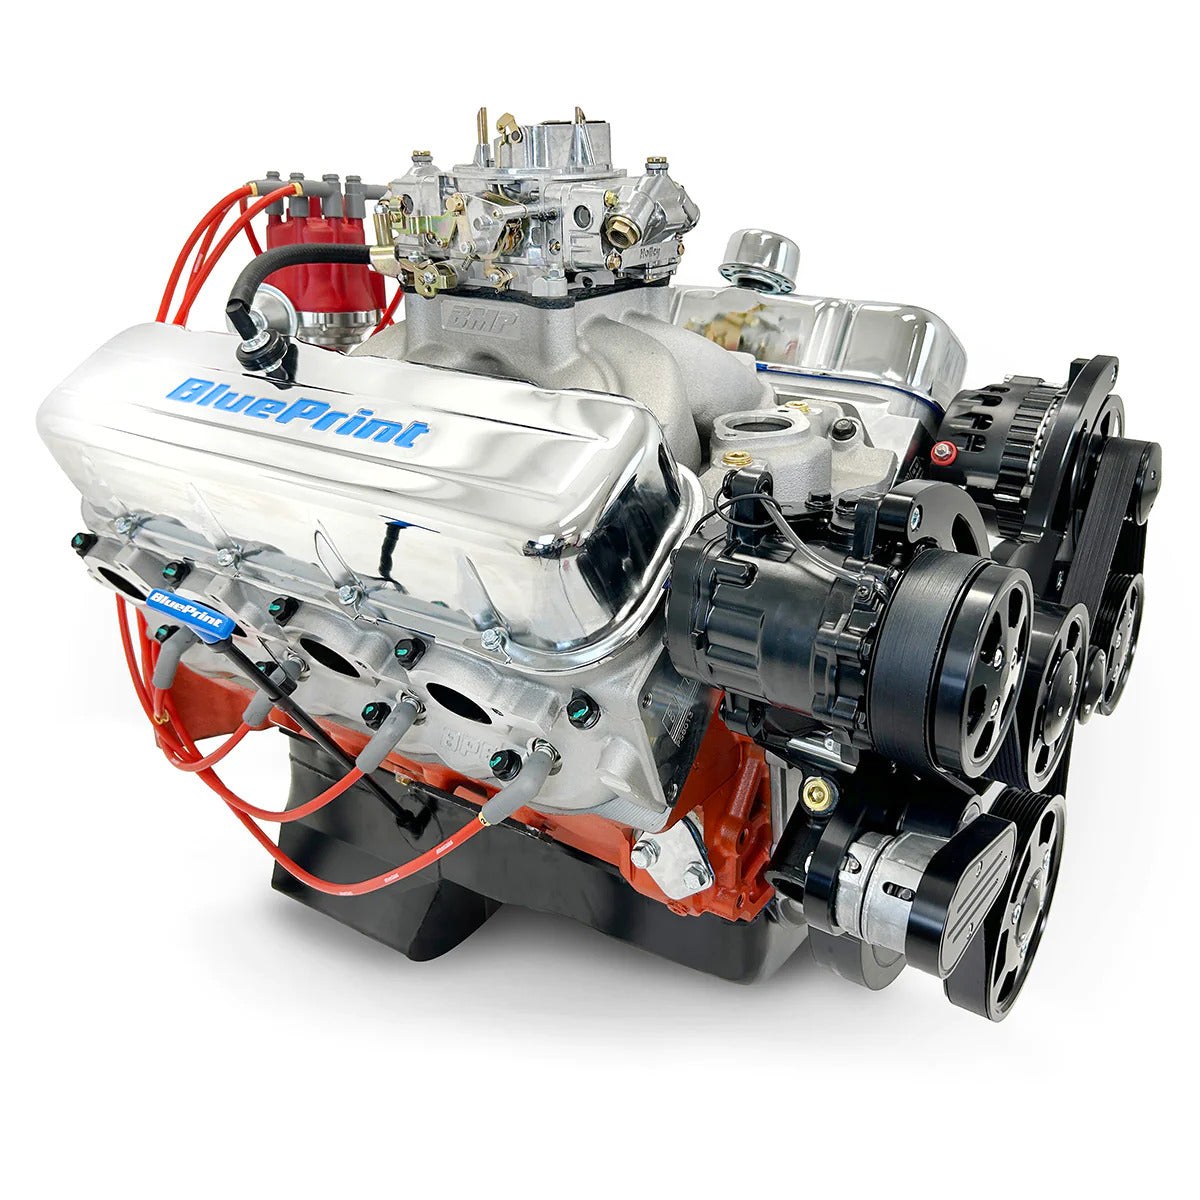 BluePrint Engines Chev 502 Pro Series Engine With Wraptor Kit # PS502CTCKB